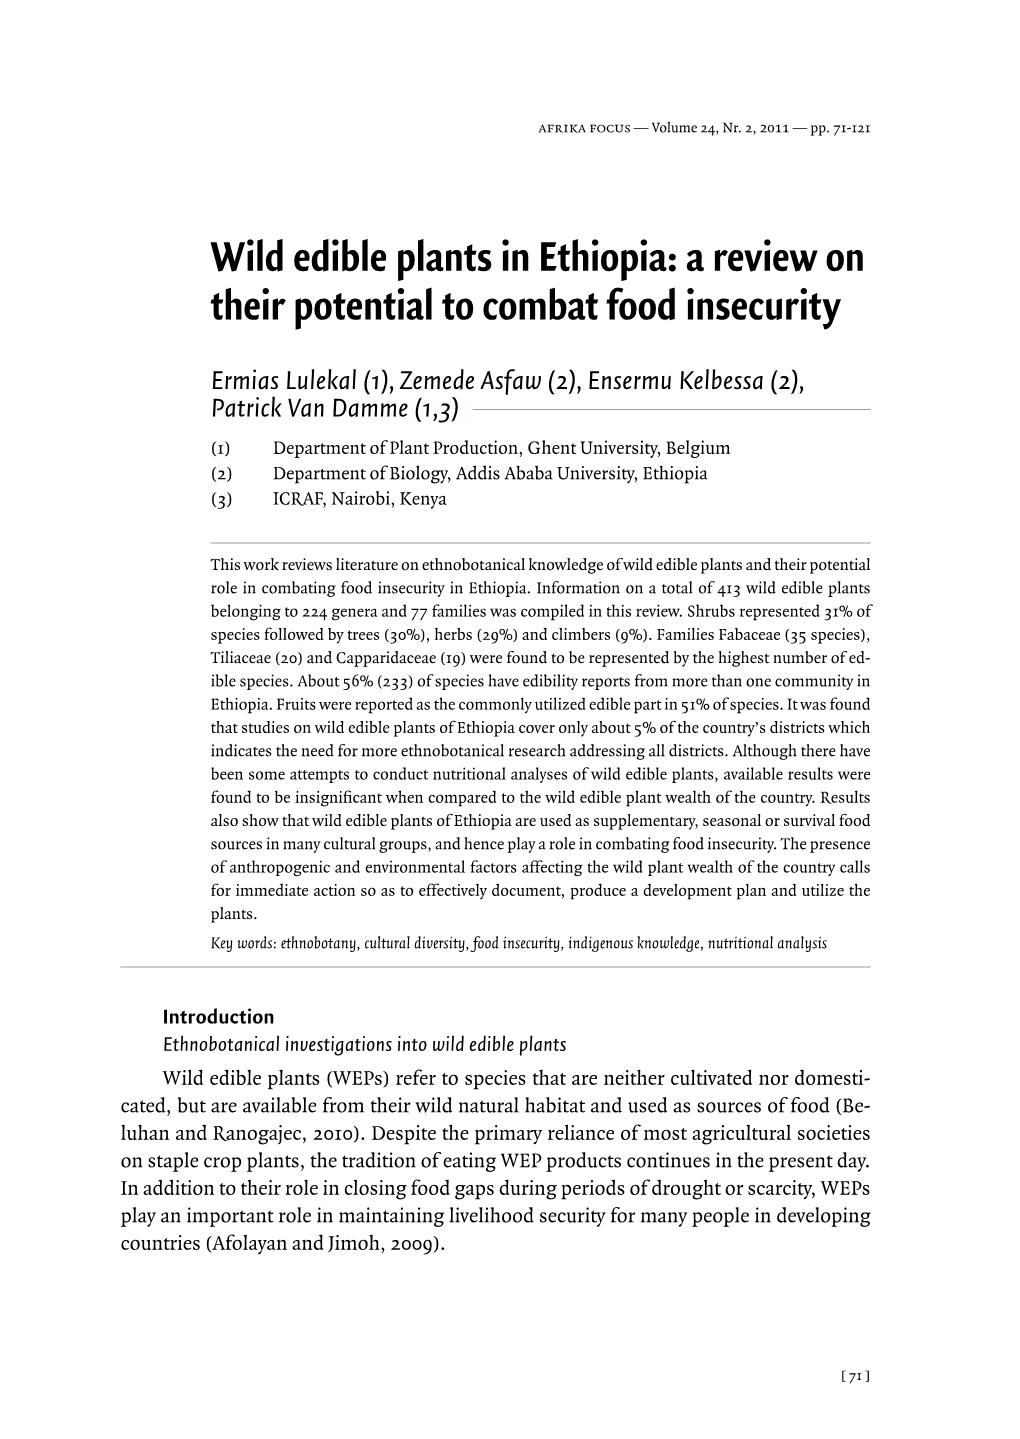 Wild Edible Plants in Ethiopia: a Review on Their Potential to Combat Food Insecurity